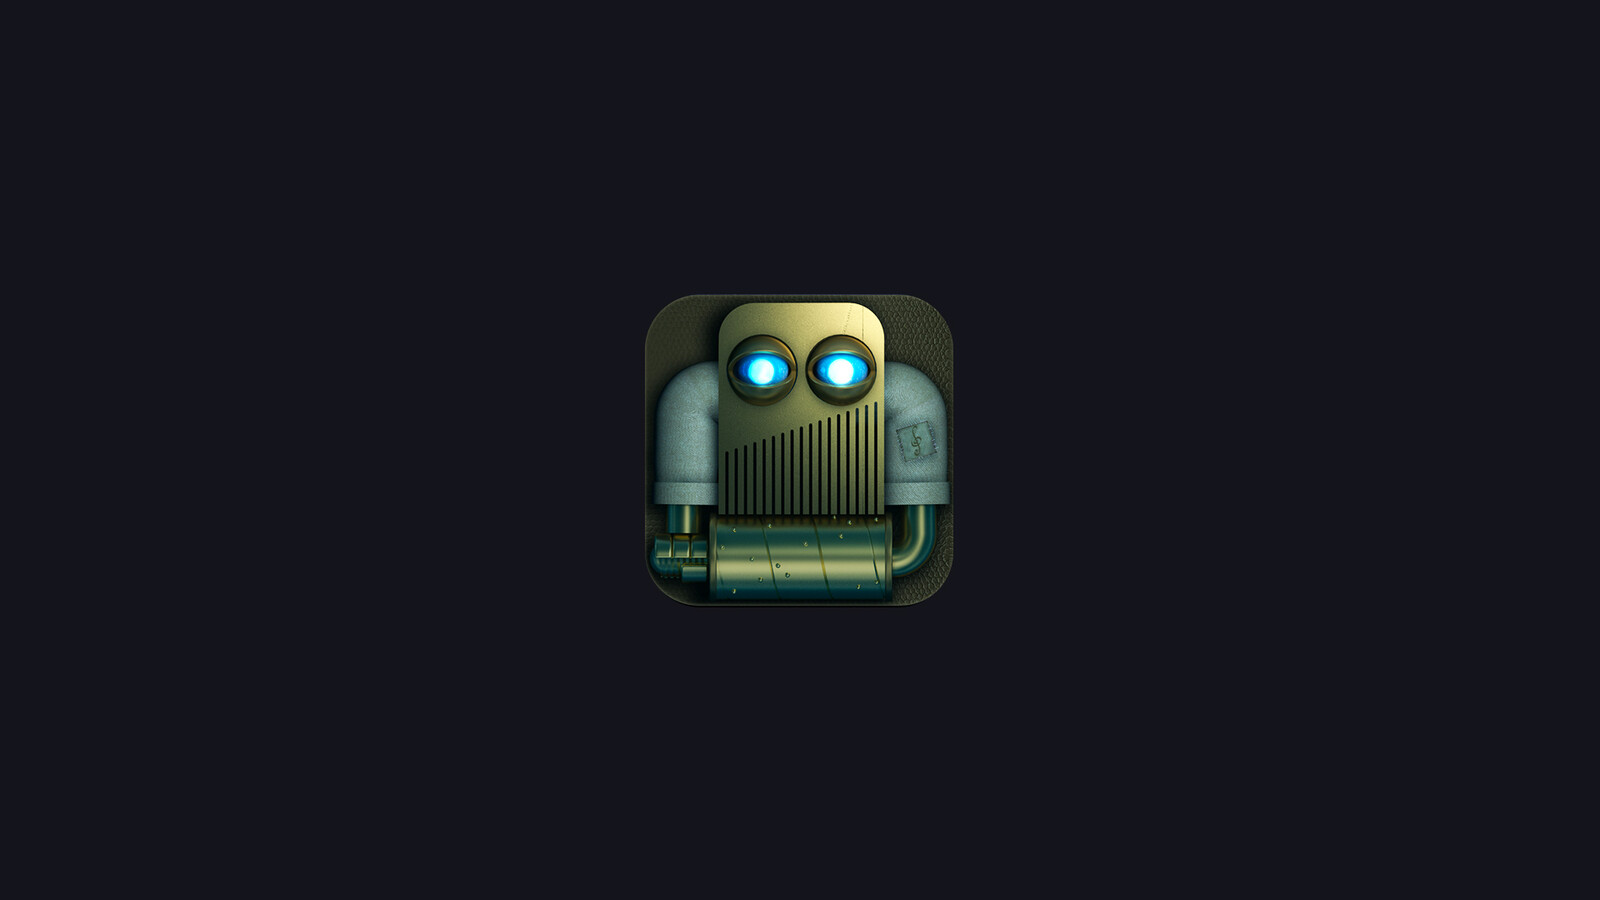 An 2013 iOS icon based on a small music box.
Misty is an old boxer robot who turned to a soulful music box player. (3D render + ps).